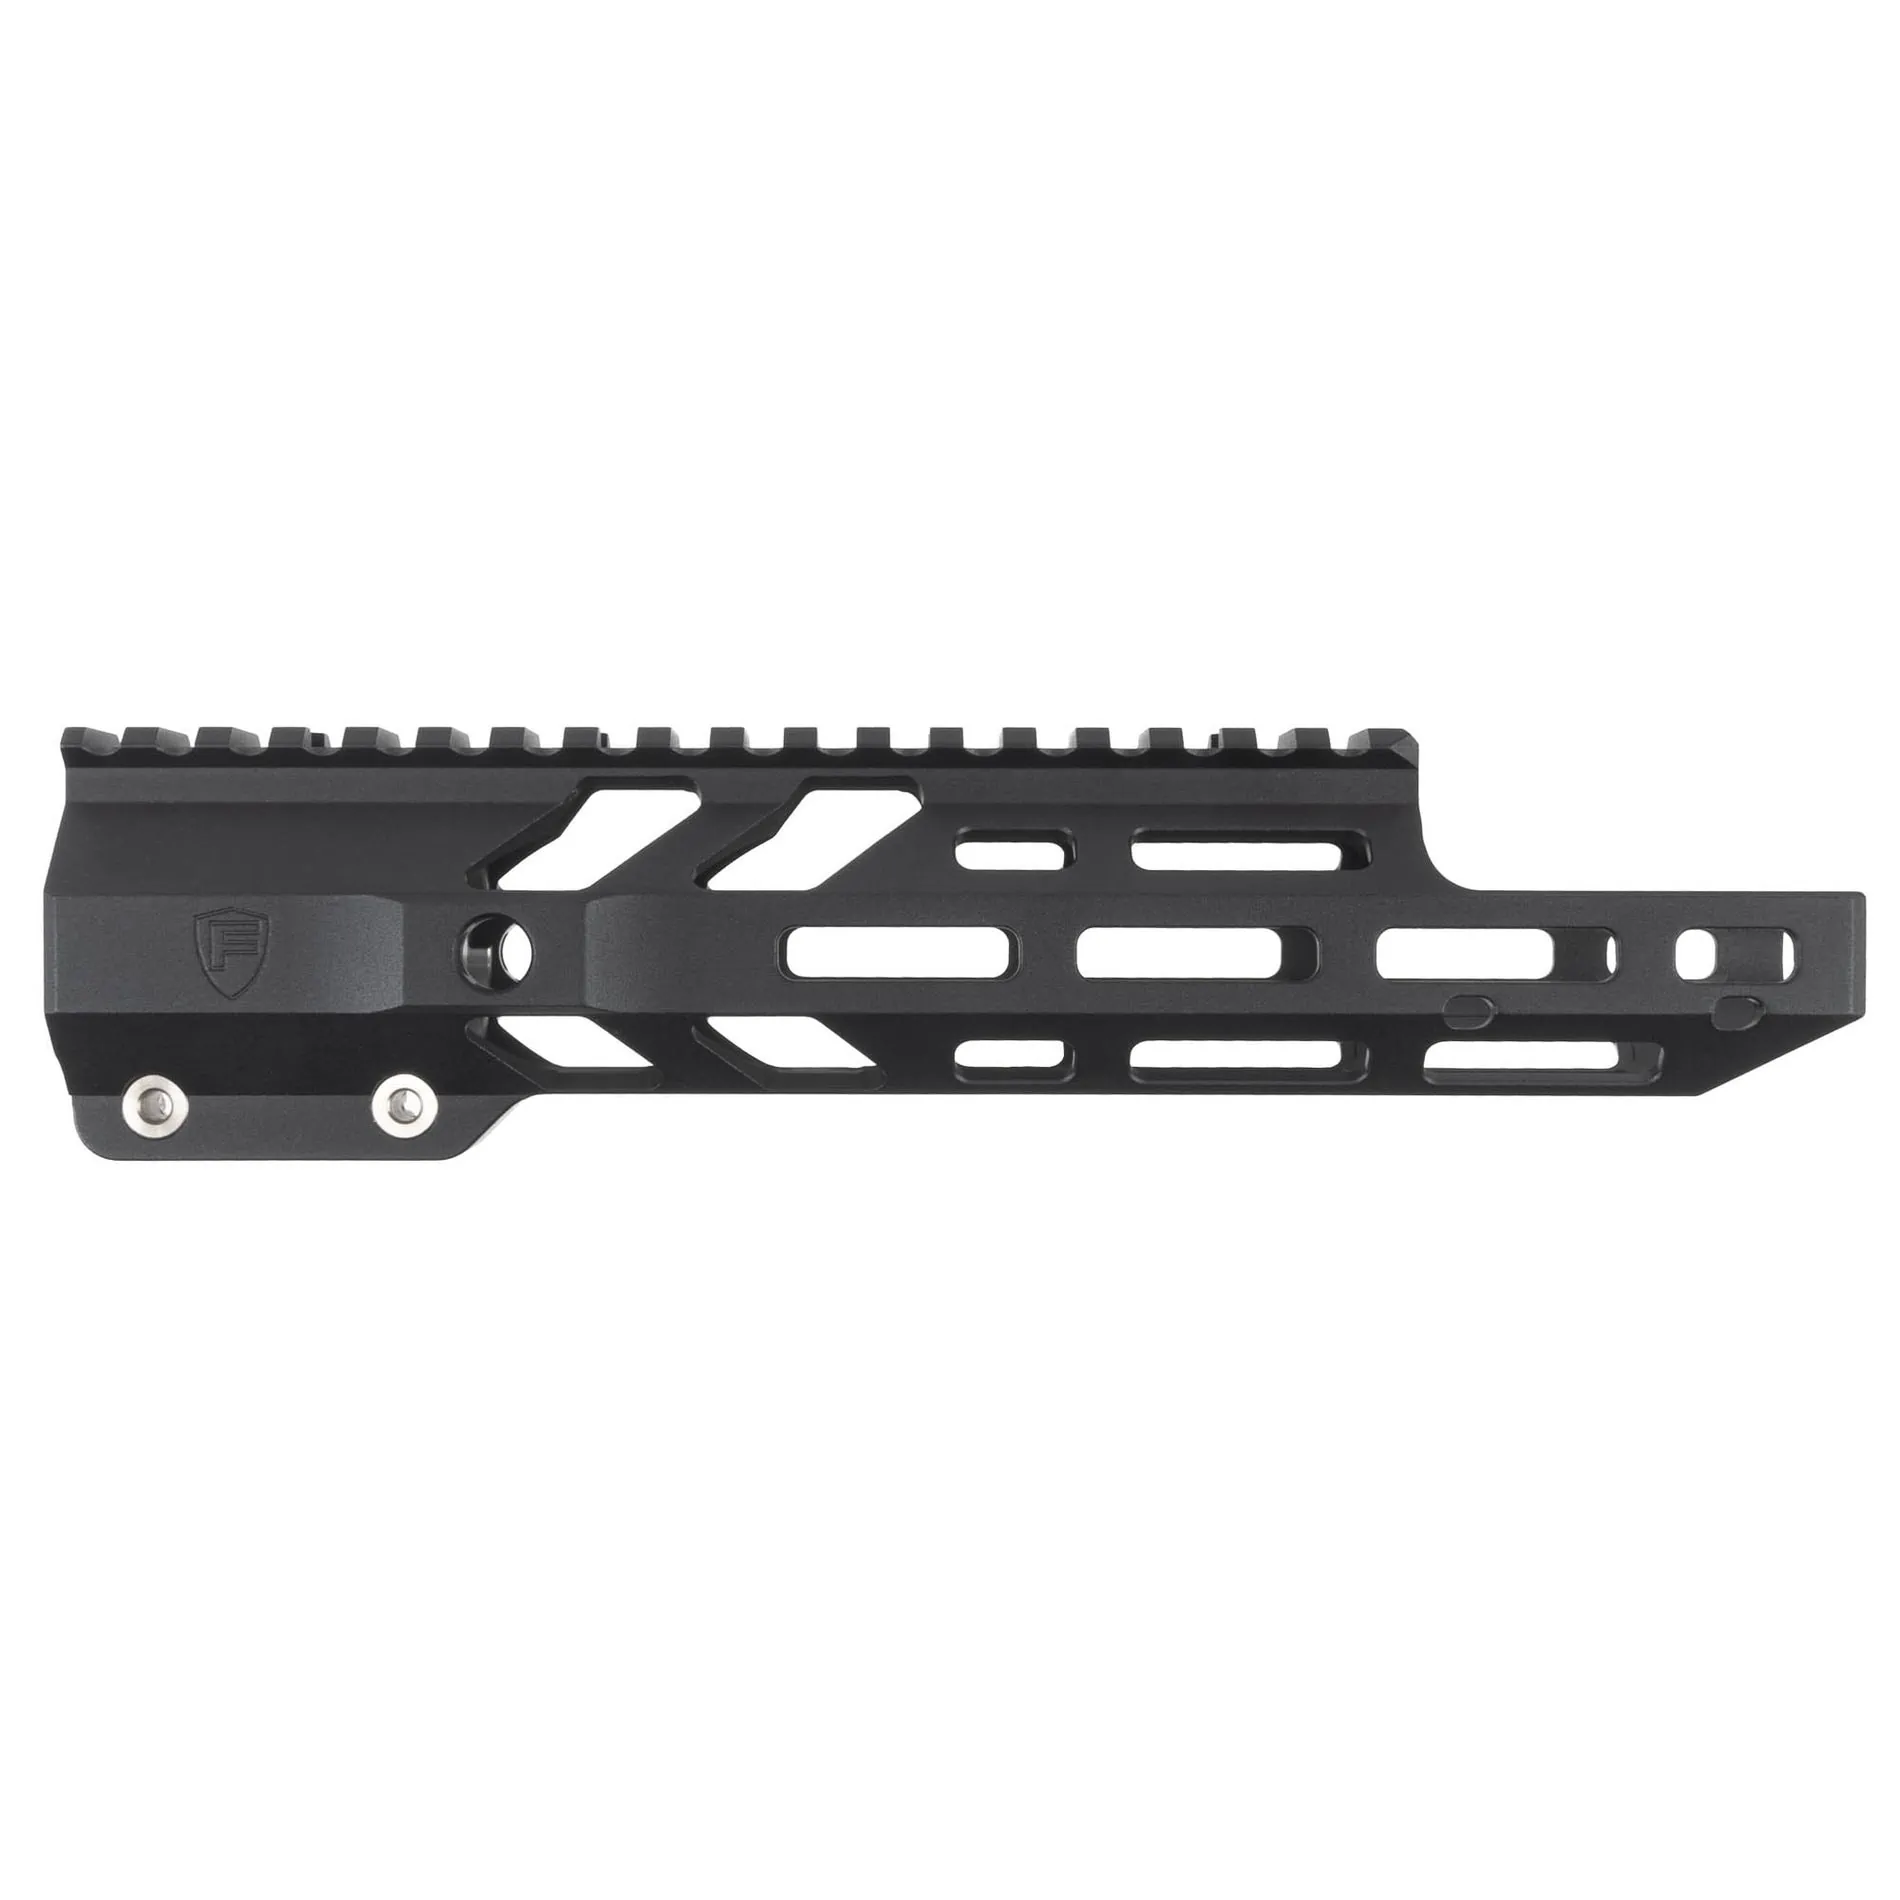 Fortis Manufacturing M-LOK Camber Rail with AR-15 FSB Cutout - AT3 Tactical